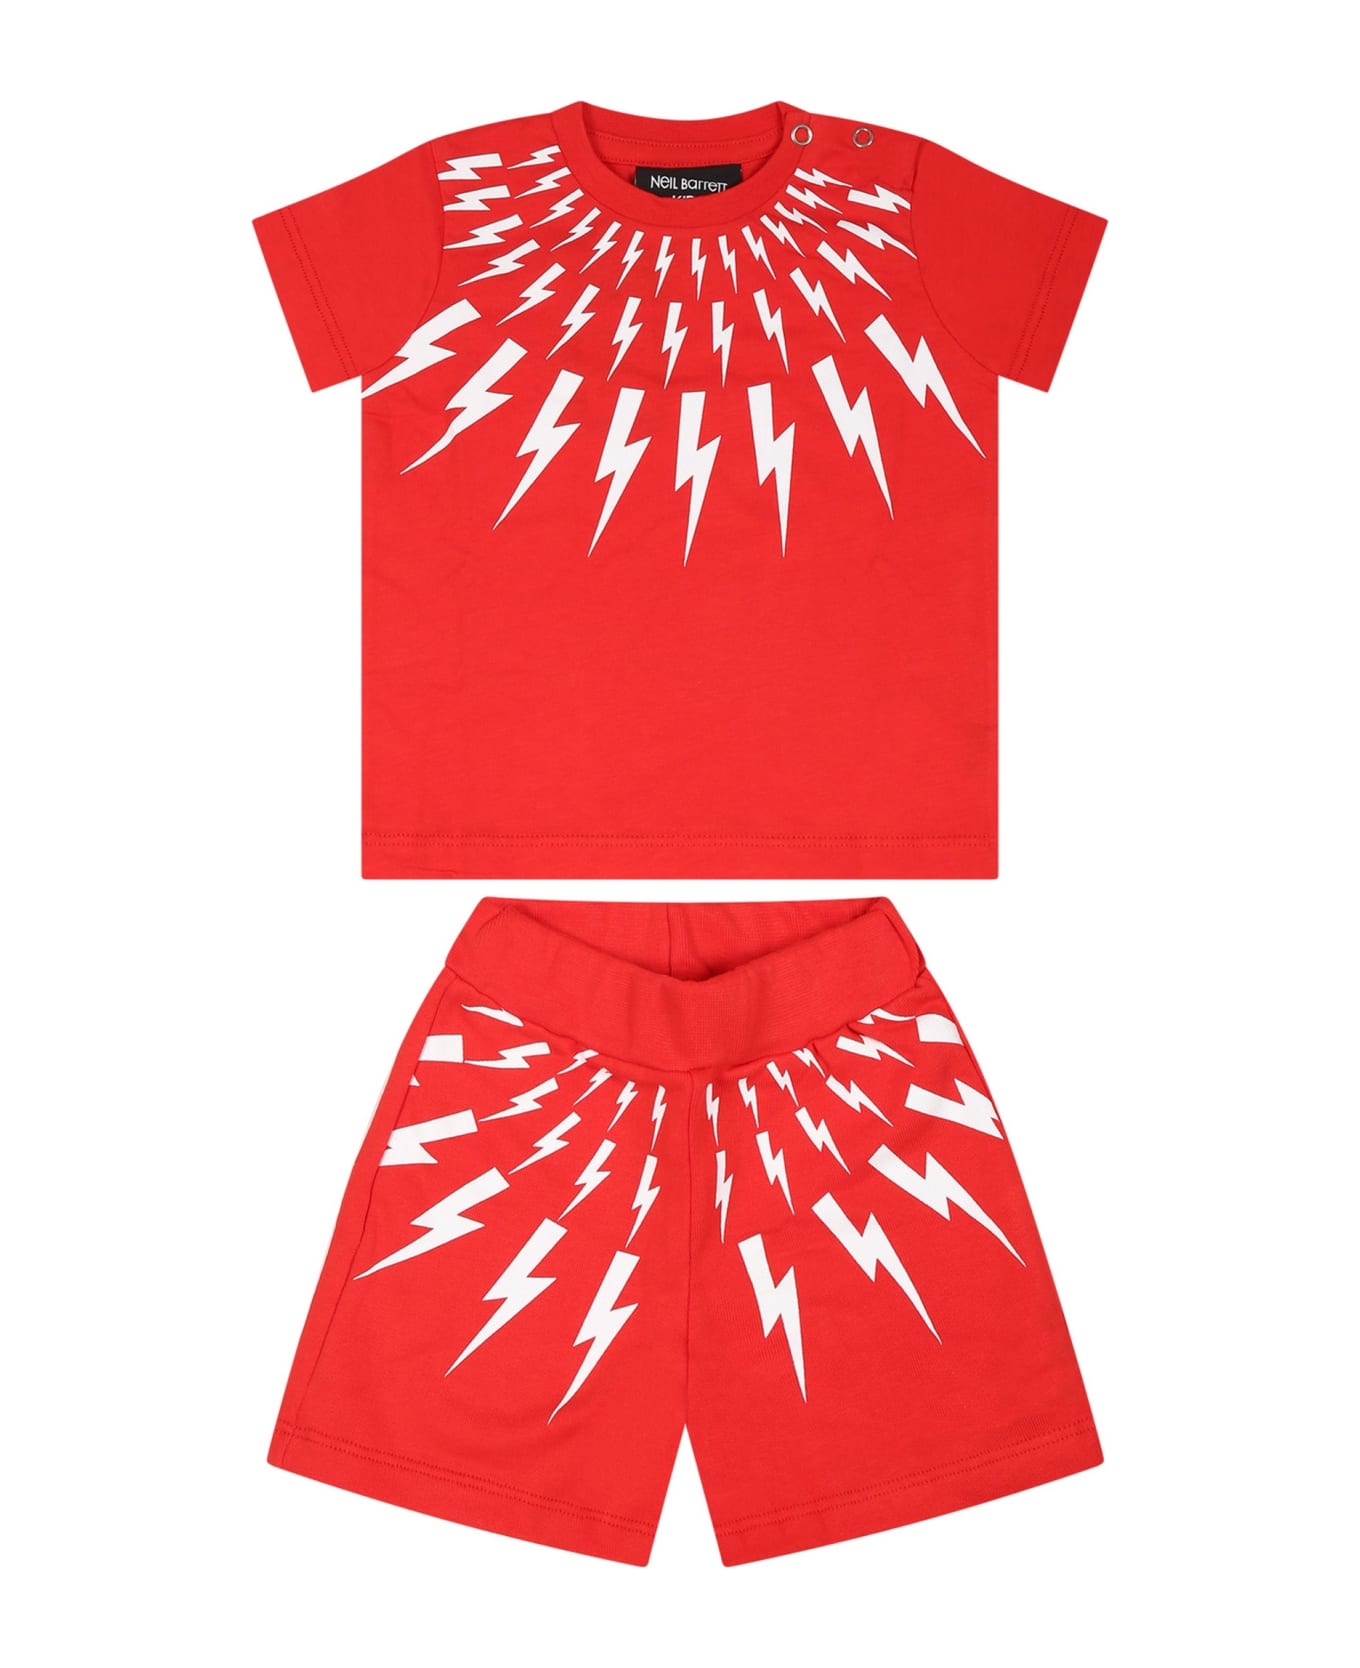 Neil Barrett Red Cotton Suit For Baby Boy With Iconic Lightning Bolts - Red